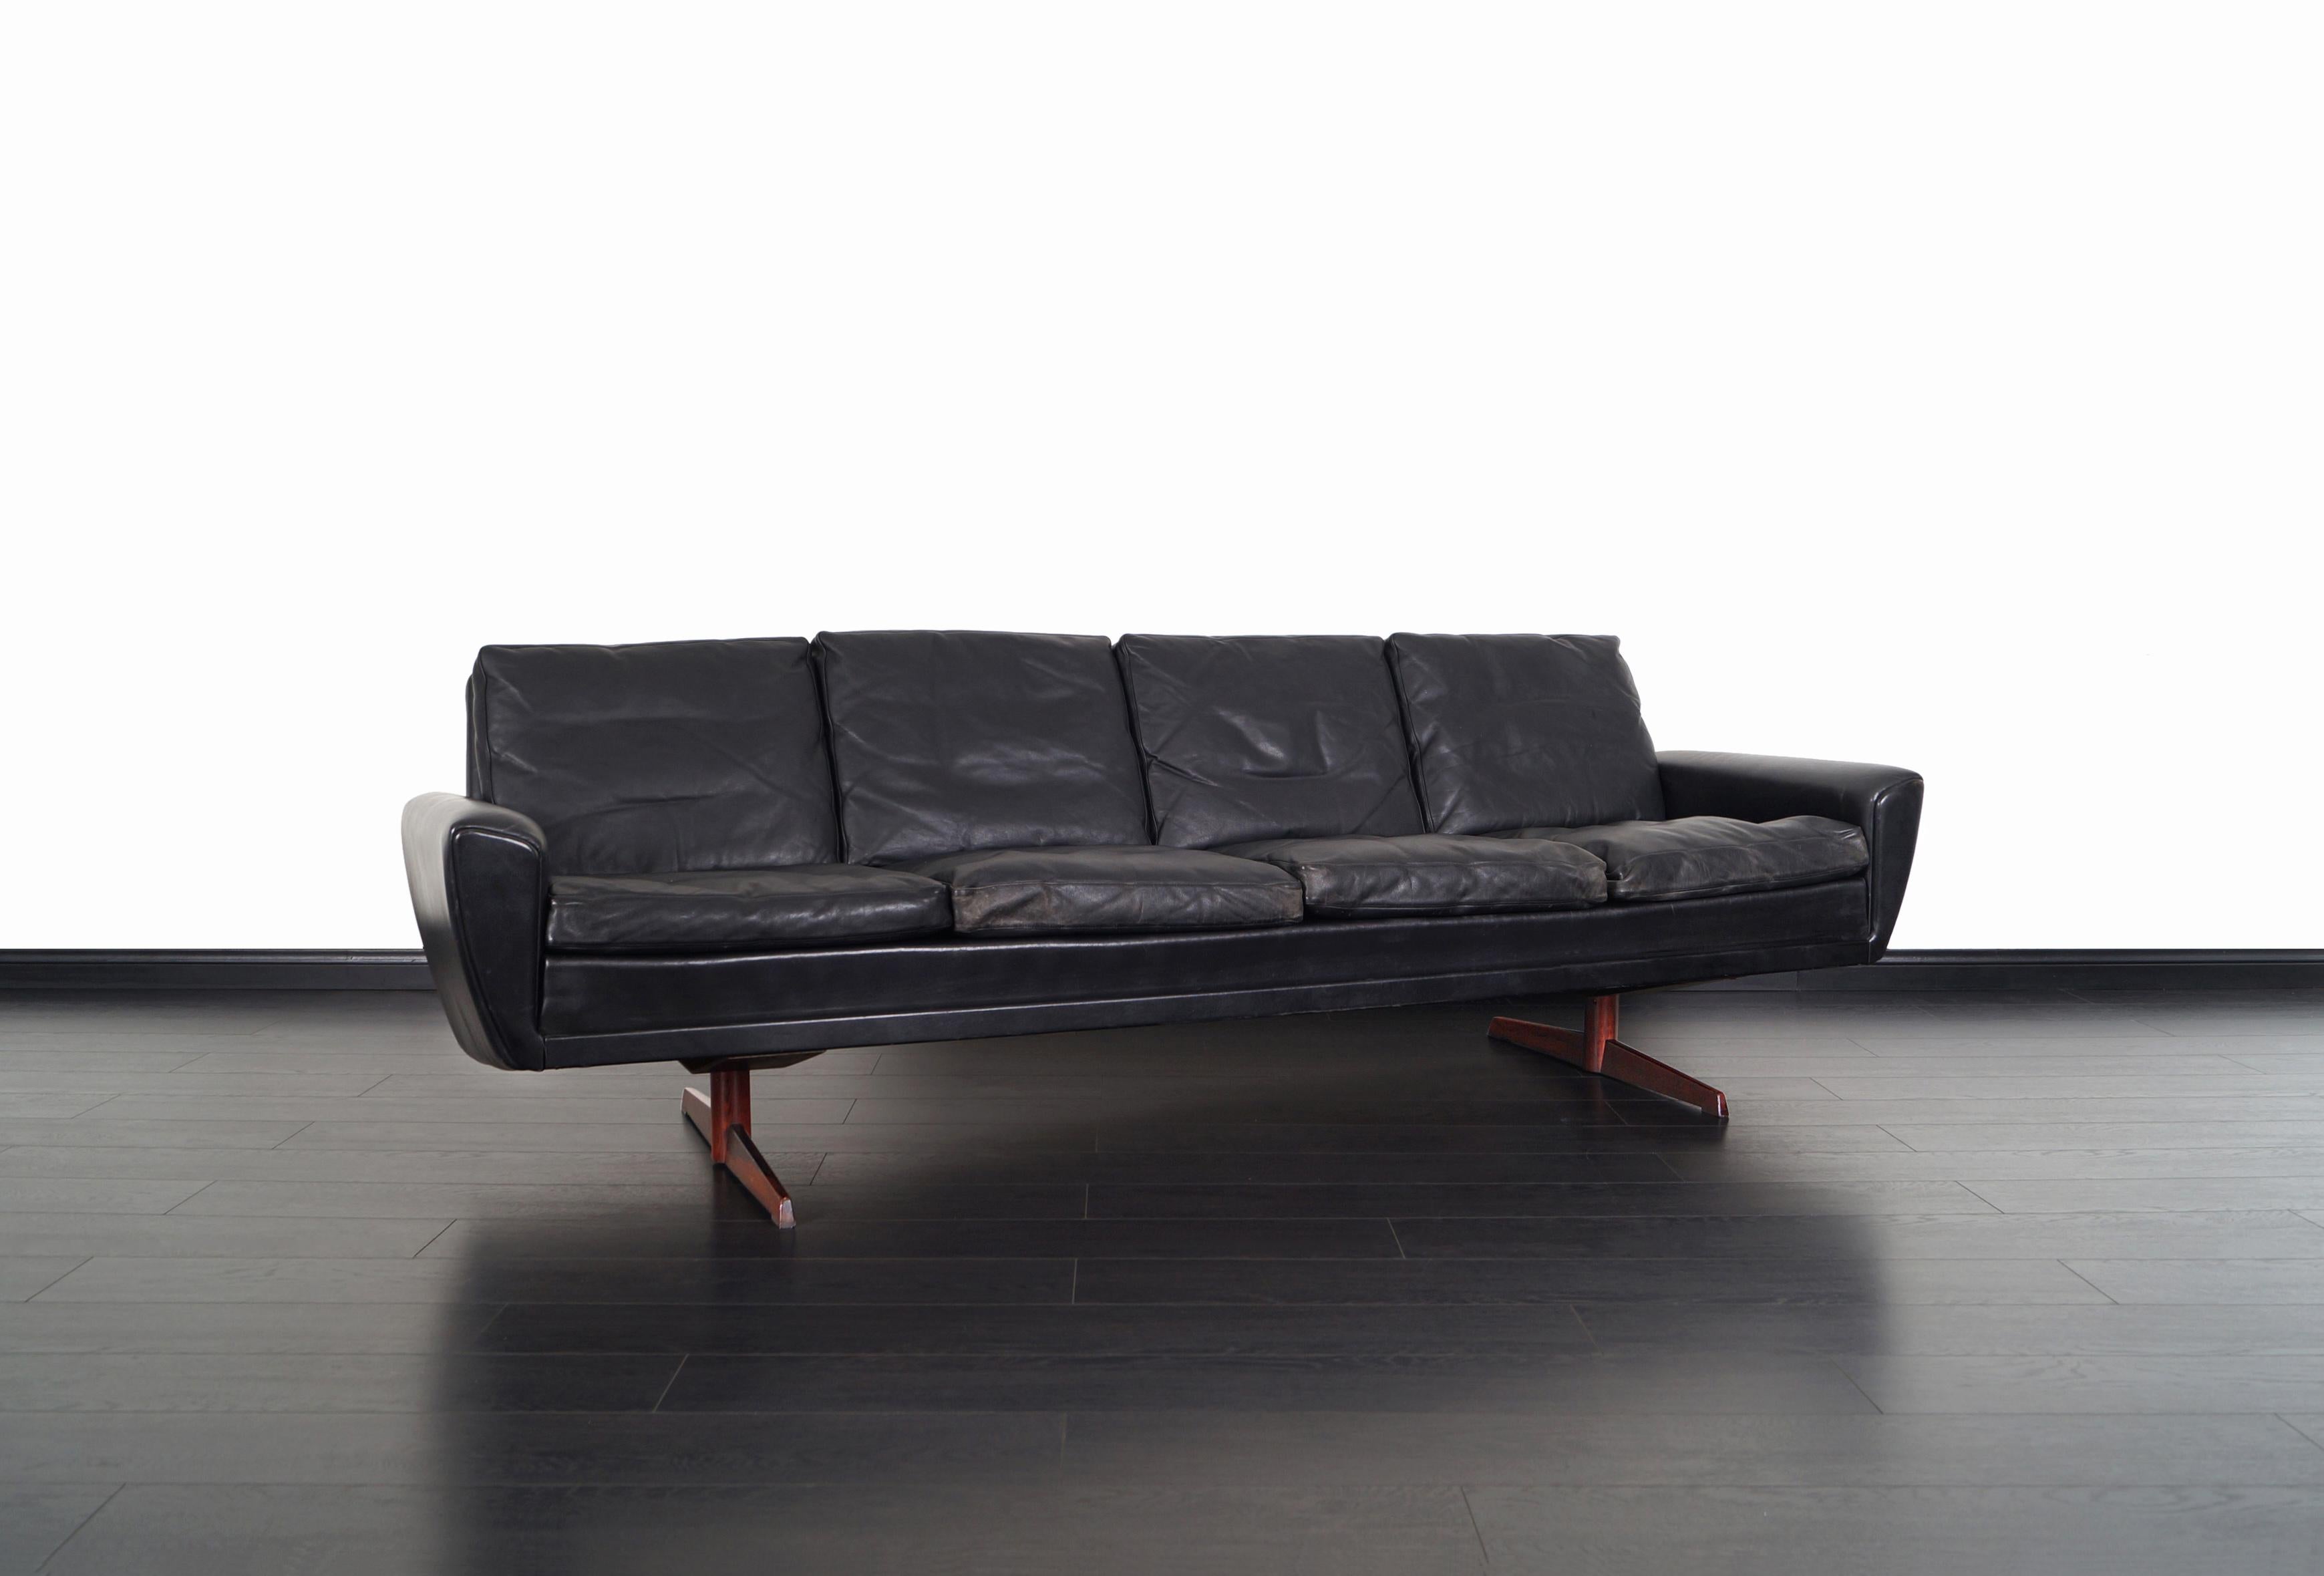 Exceptional Danish modern wingback sofa designed by Georg Thams for Vejen Polstermøbelfabrik in Denmark, circa 1970s. This comfortable sofa has its original leather upholstery. The leather is in good condition showing a beautiful patina ideal for